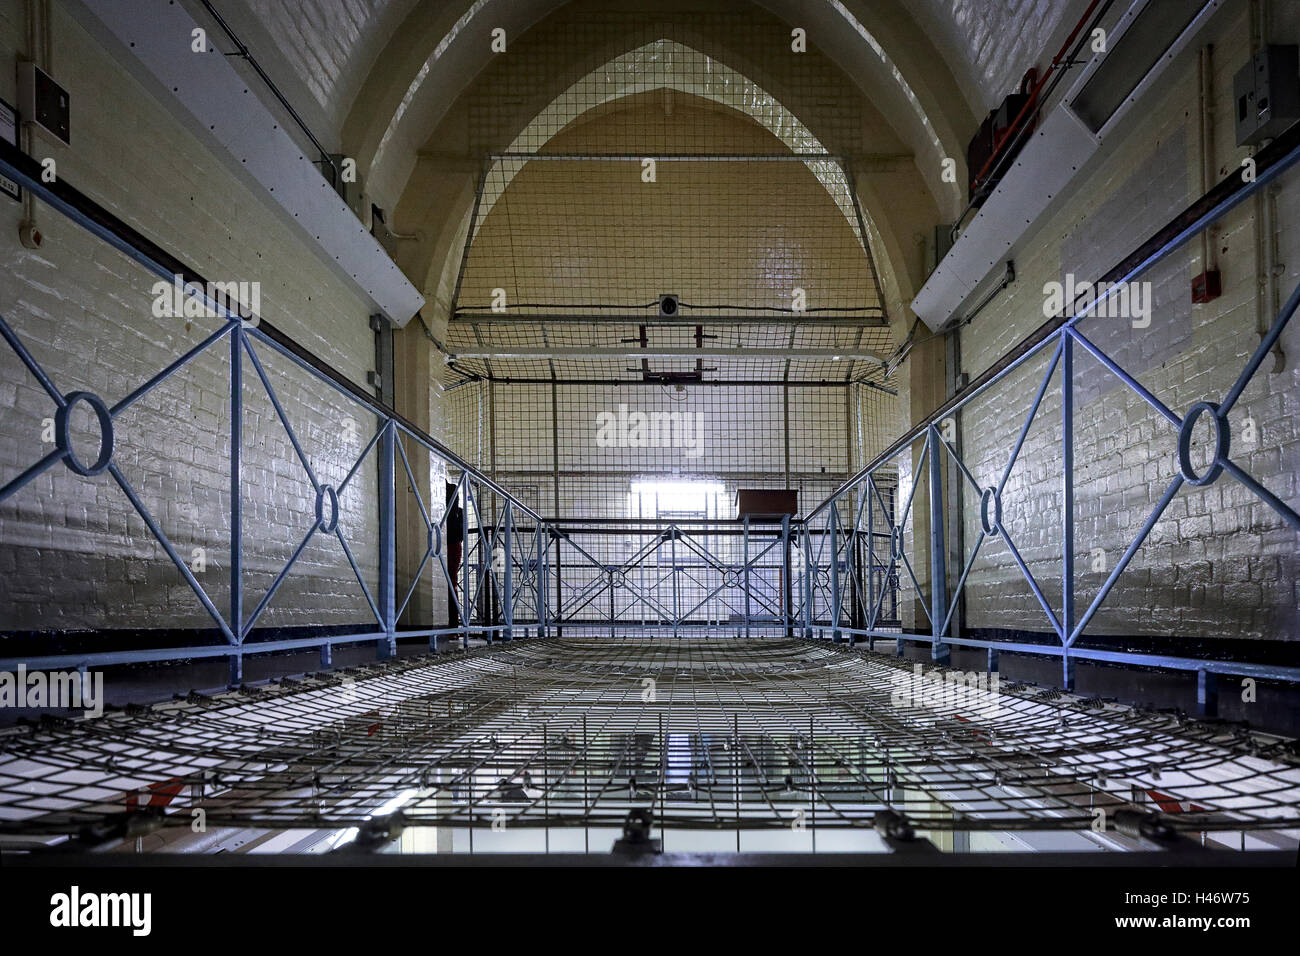 Her Majesty's Prison Reading, England opened to the public in 2016 - safety nets Landing 3 Stock Photo